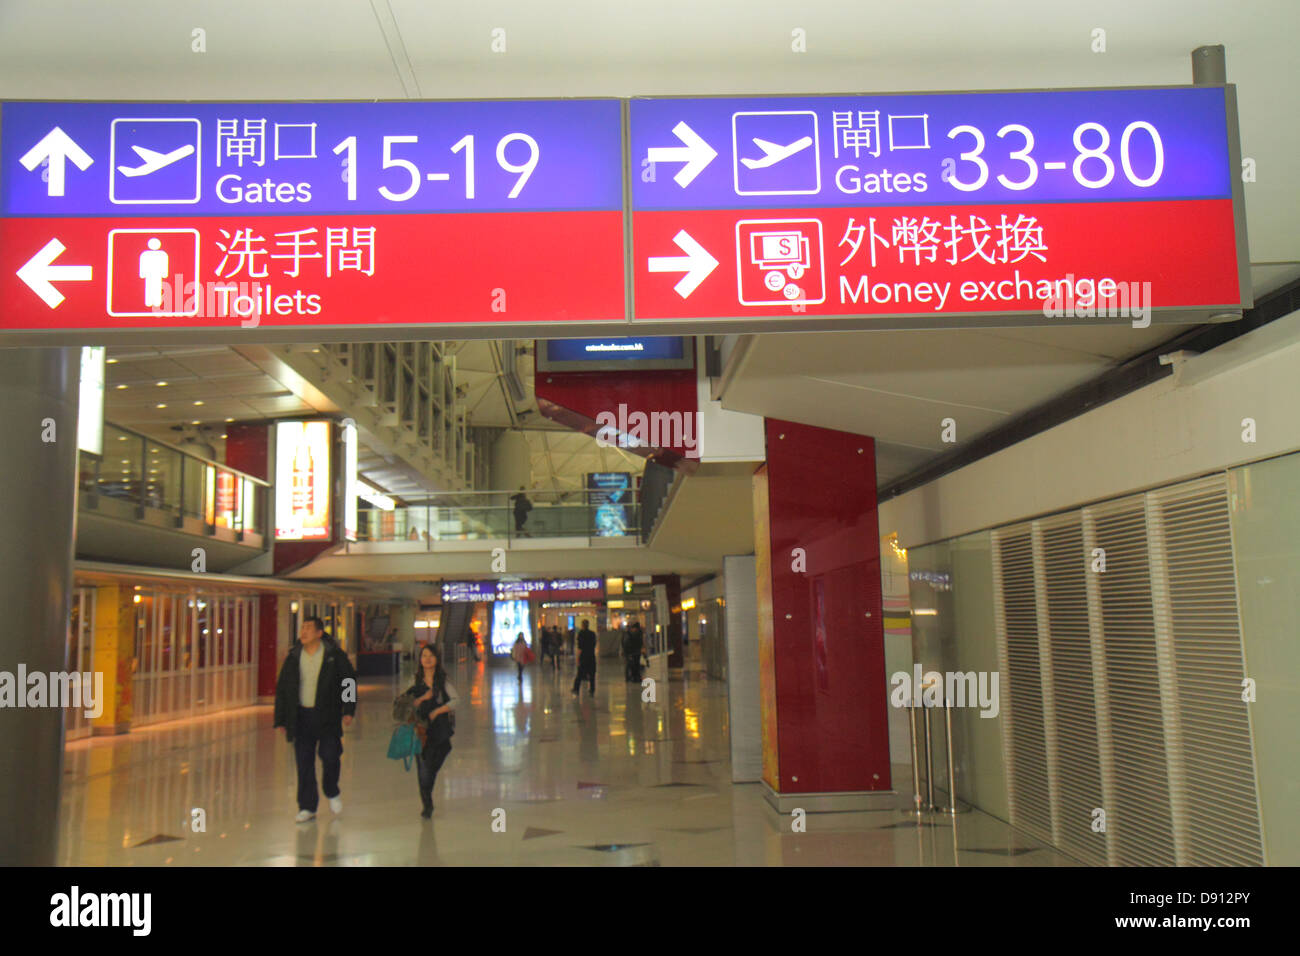 China,Asia,Far East,Orient,Oriental,Hong Kong,International Airport,HKG,terminal,gate,signs,information,directions,hanzi,Chinese,characters,HK13013000 Stock Photo